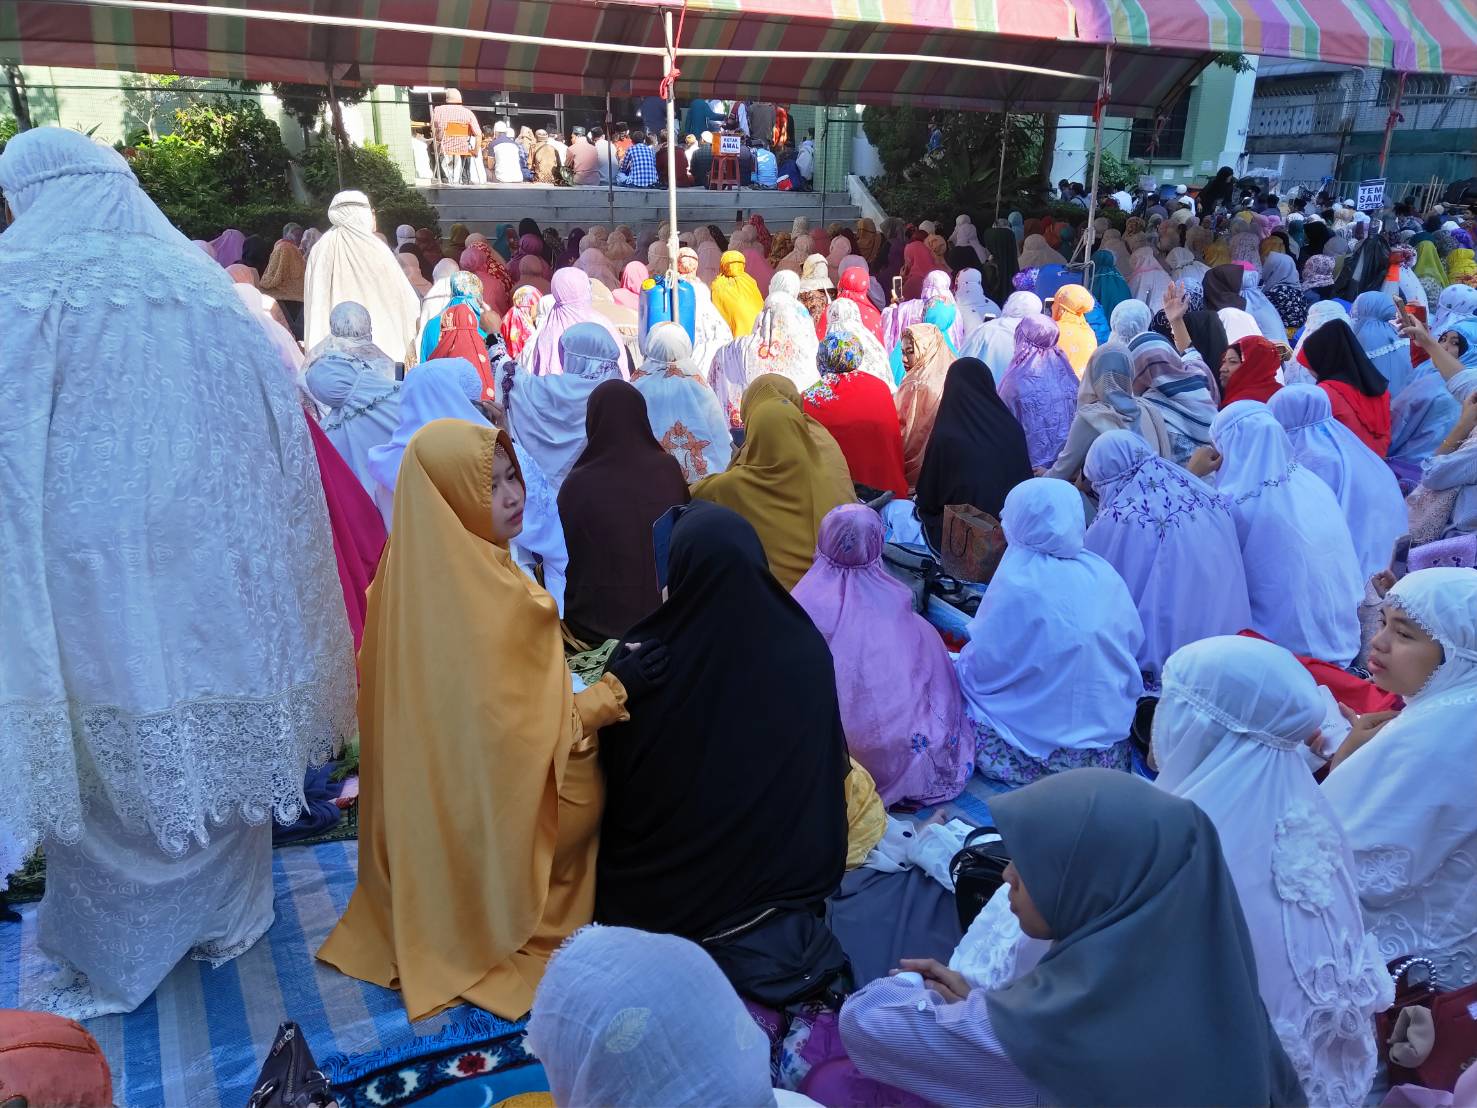 During the Islamic New Year, the mosque is always crowded. (Photo / Provided by Ida)